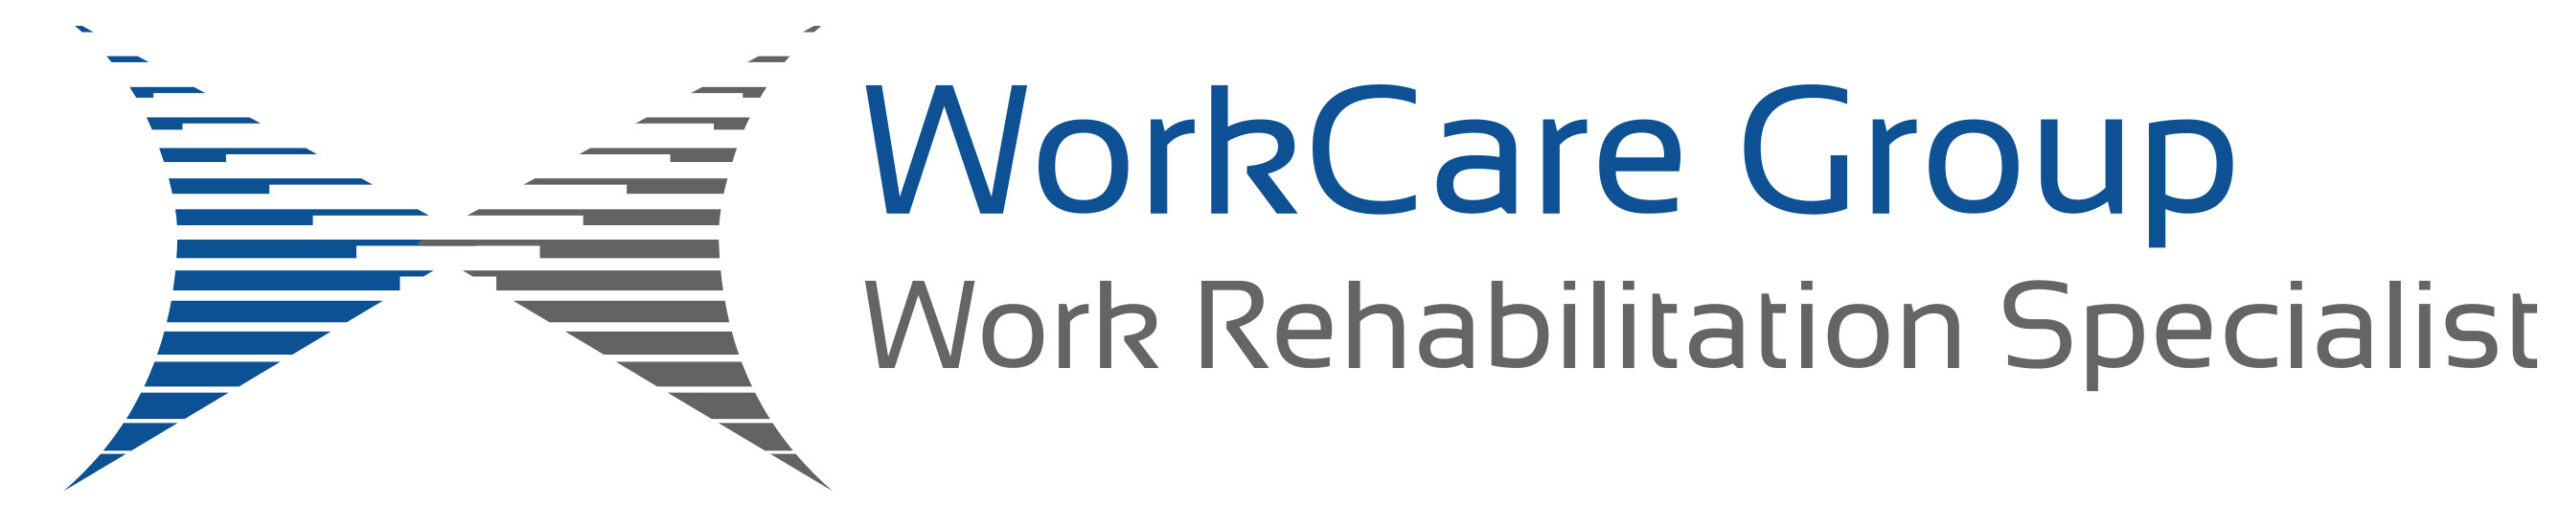 WorkCare Group